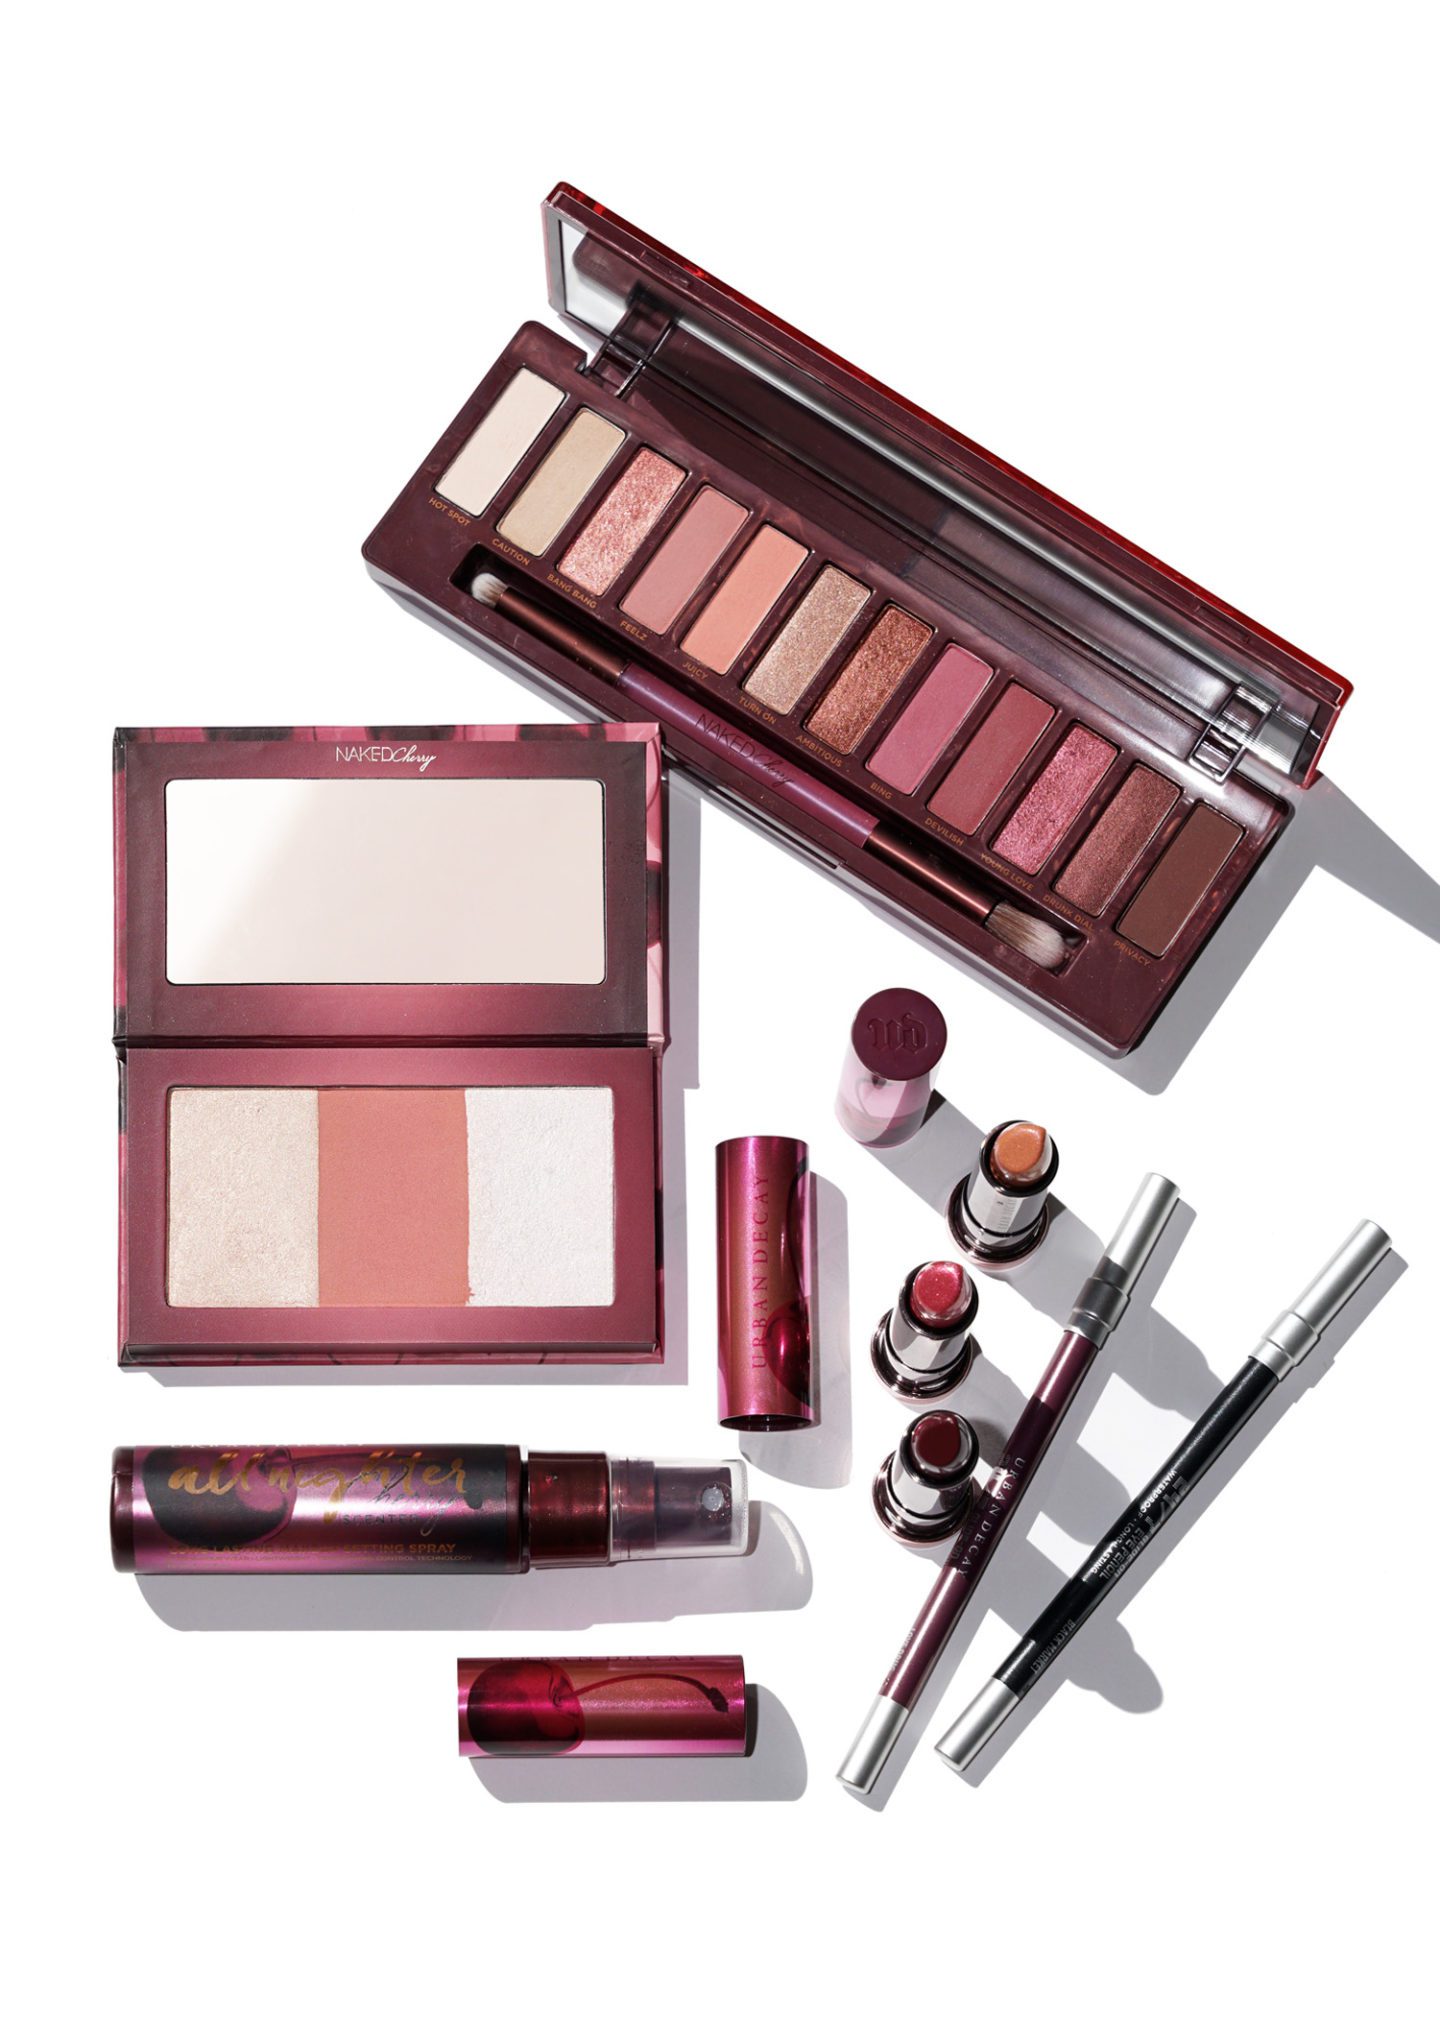 Urban Decay NAKED Cherry Eyeshadow Palette is coming, here 